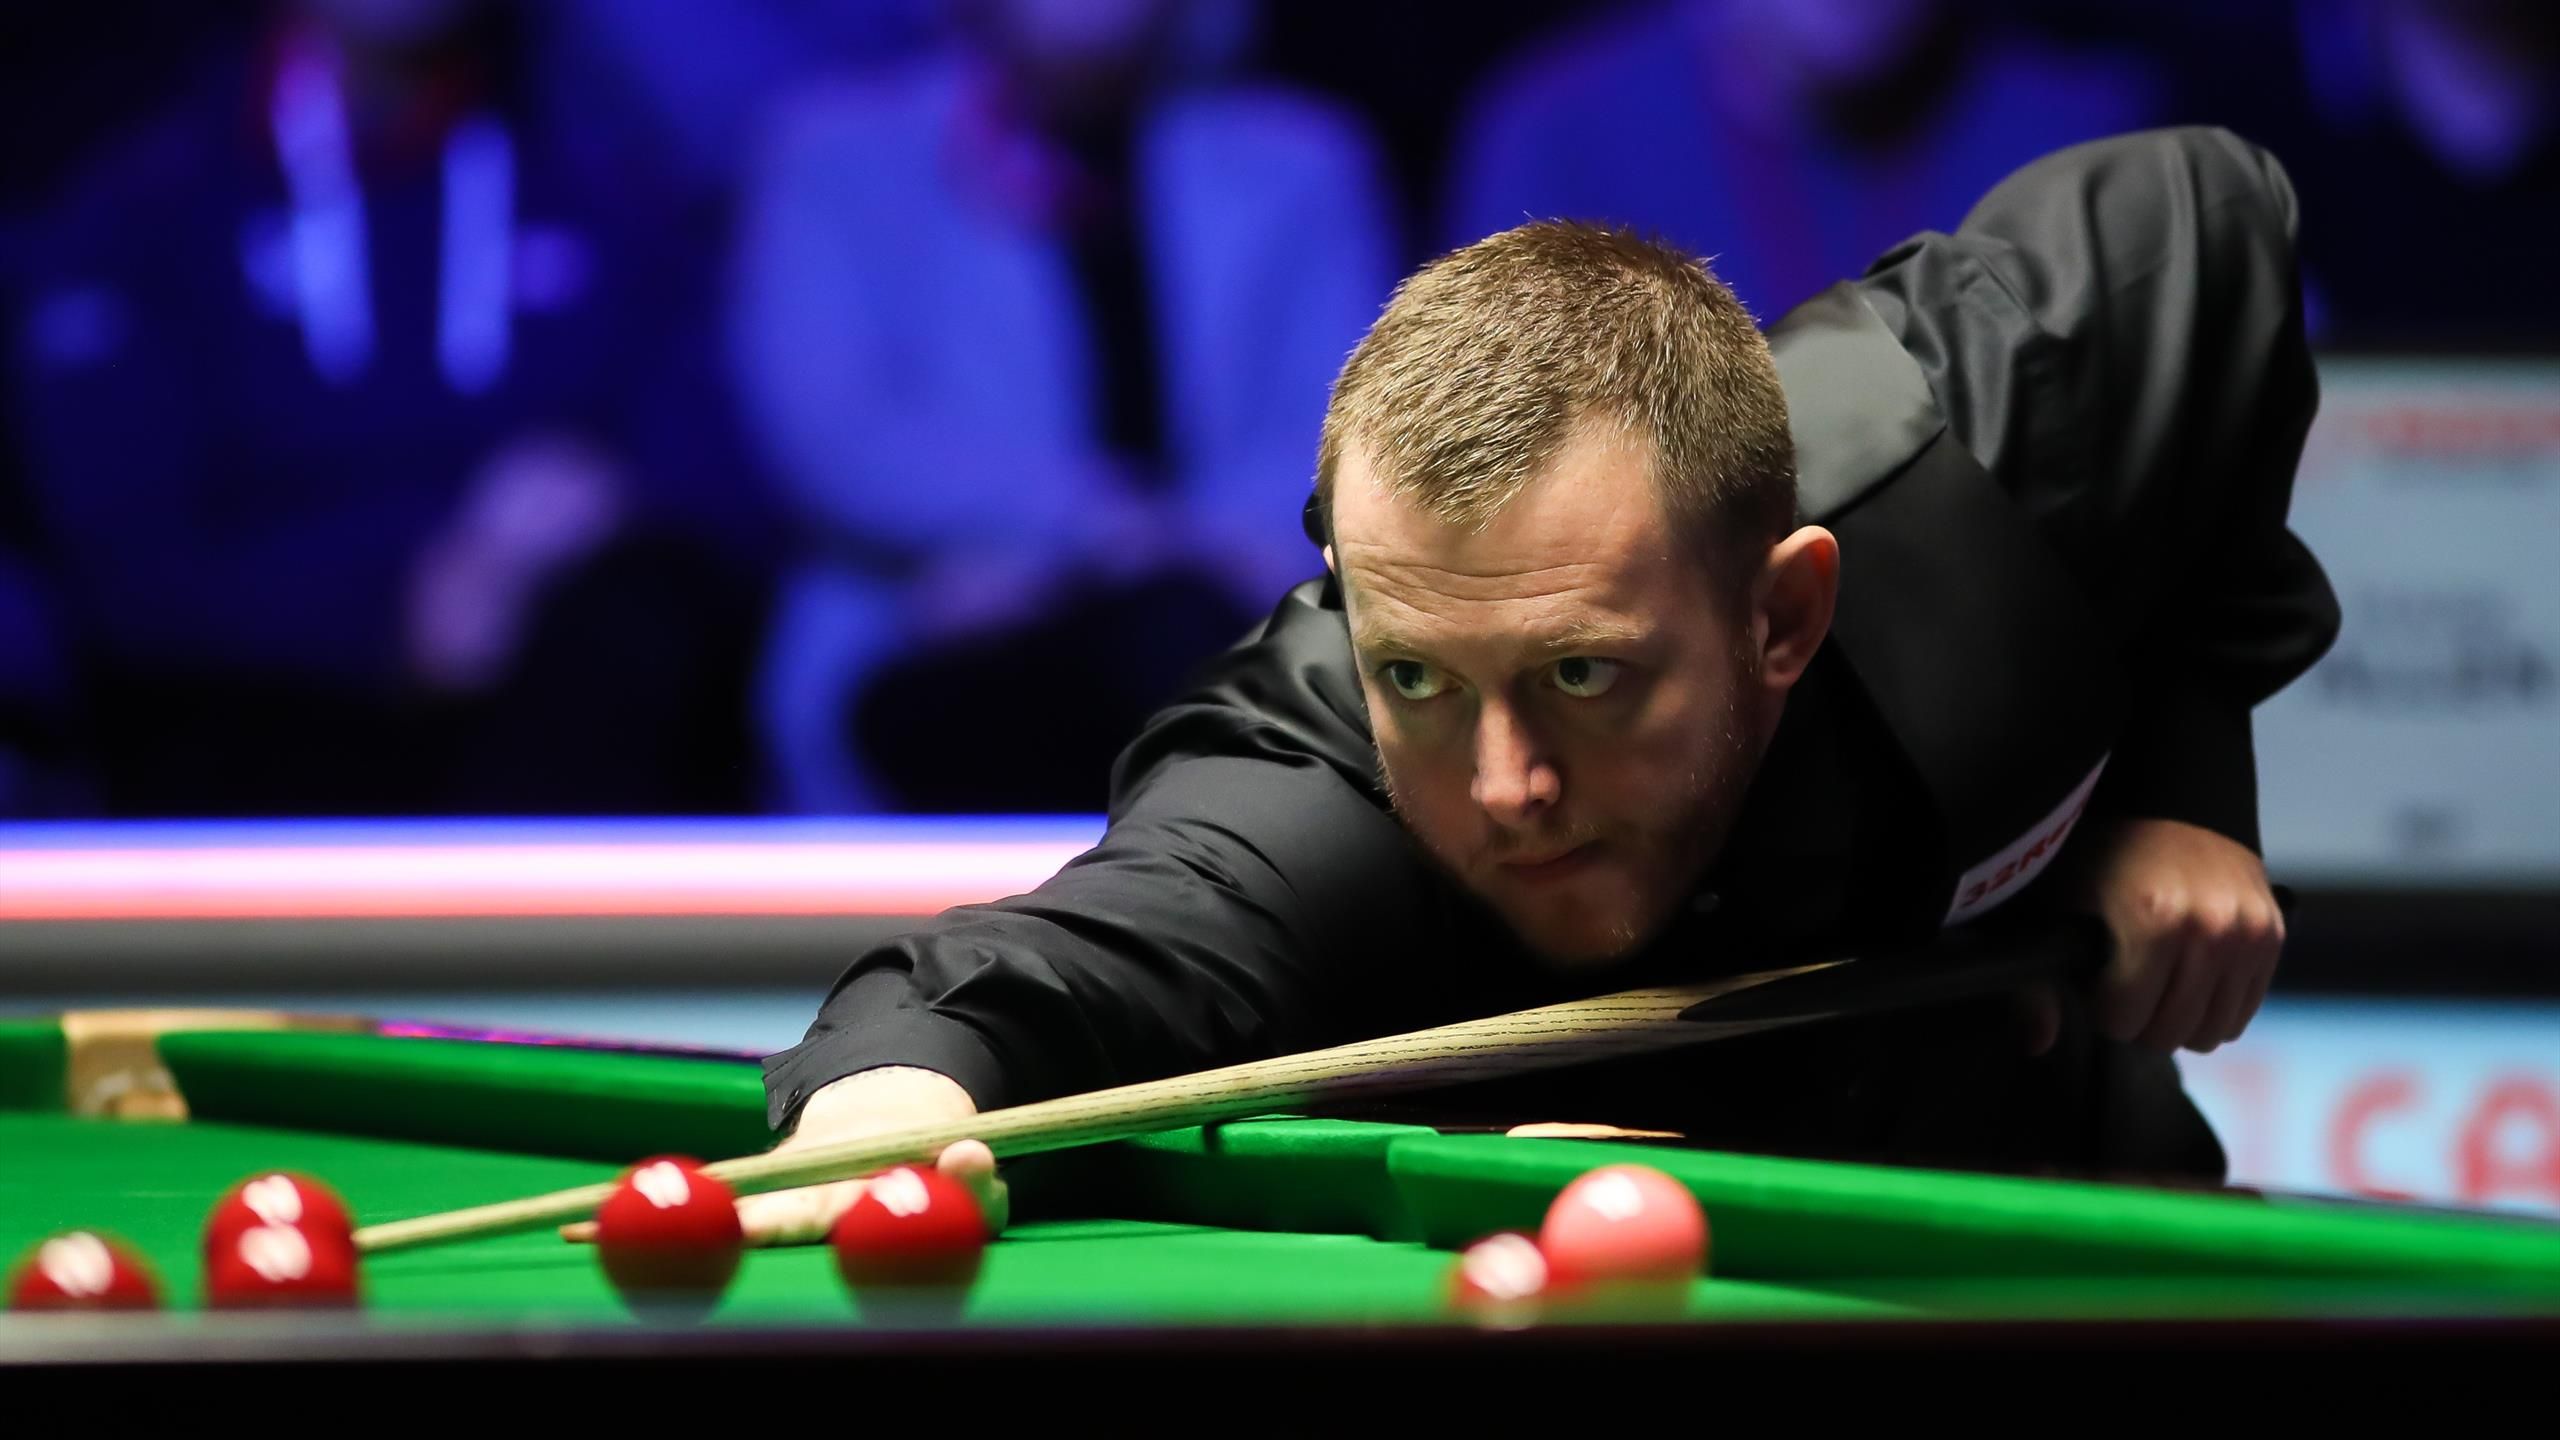 British Open 2022 Mark Allen beats Noppon Saengkham in comfortable fashion and books spot in final